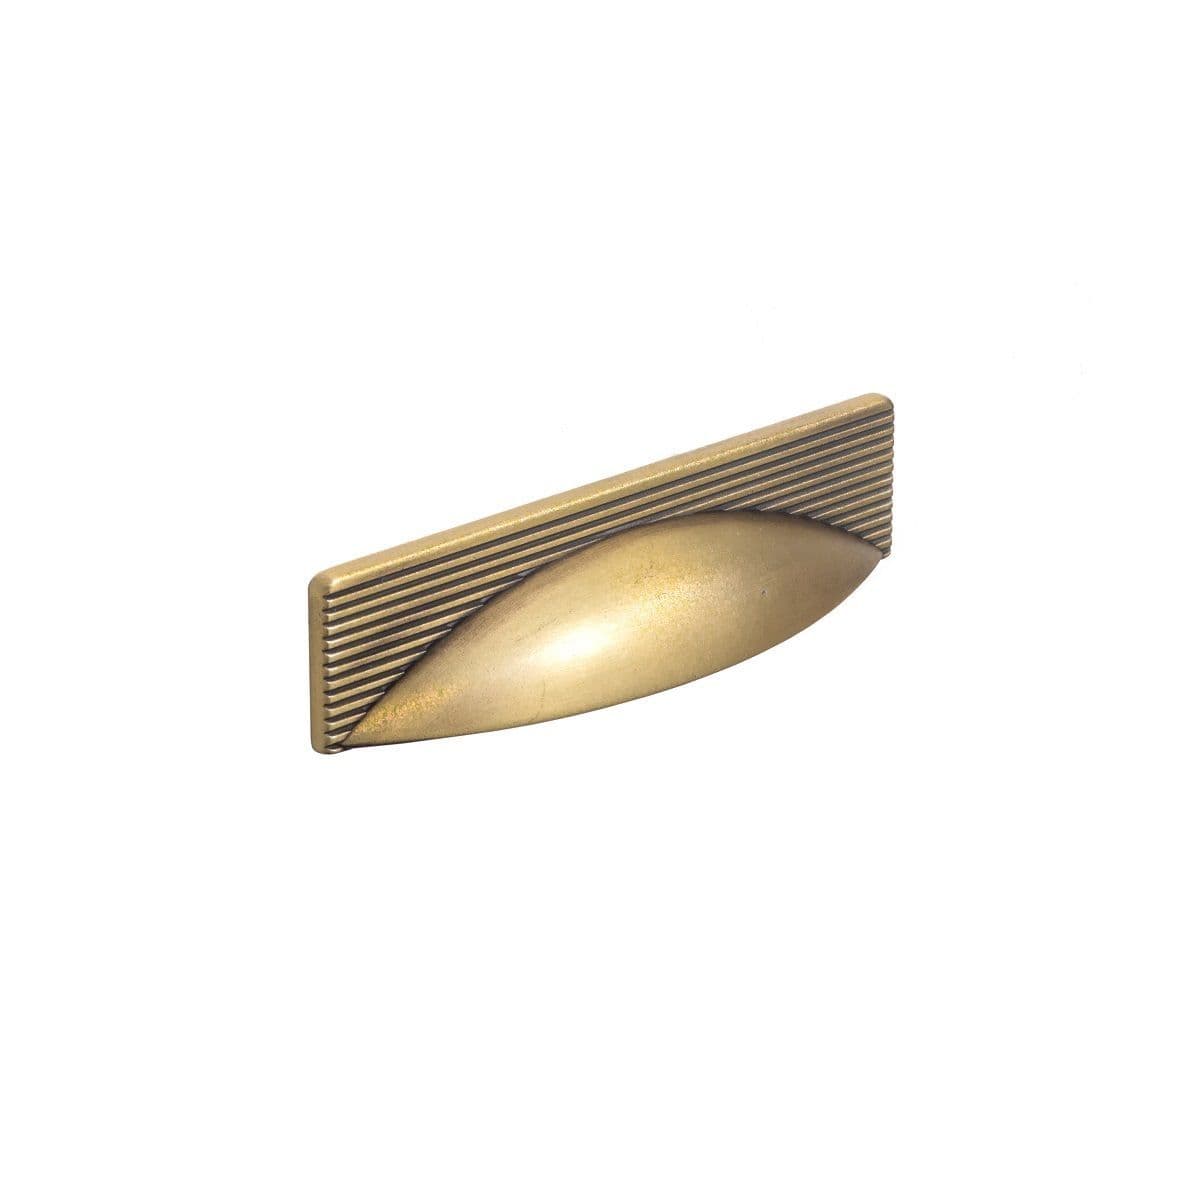 ALCHESTER FLUTED CUP Cupboard Handle - 96mm h/c size - 5 finishes (PWS H1179.96)